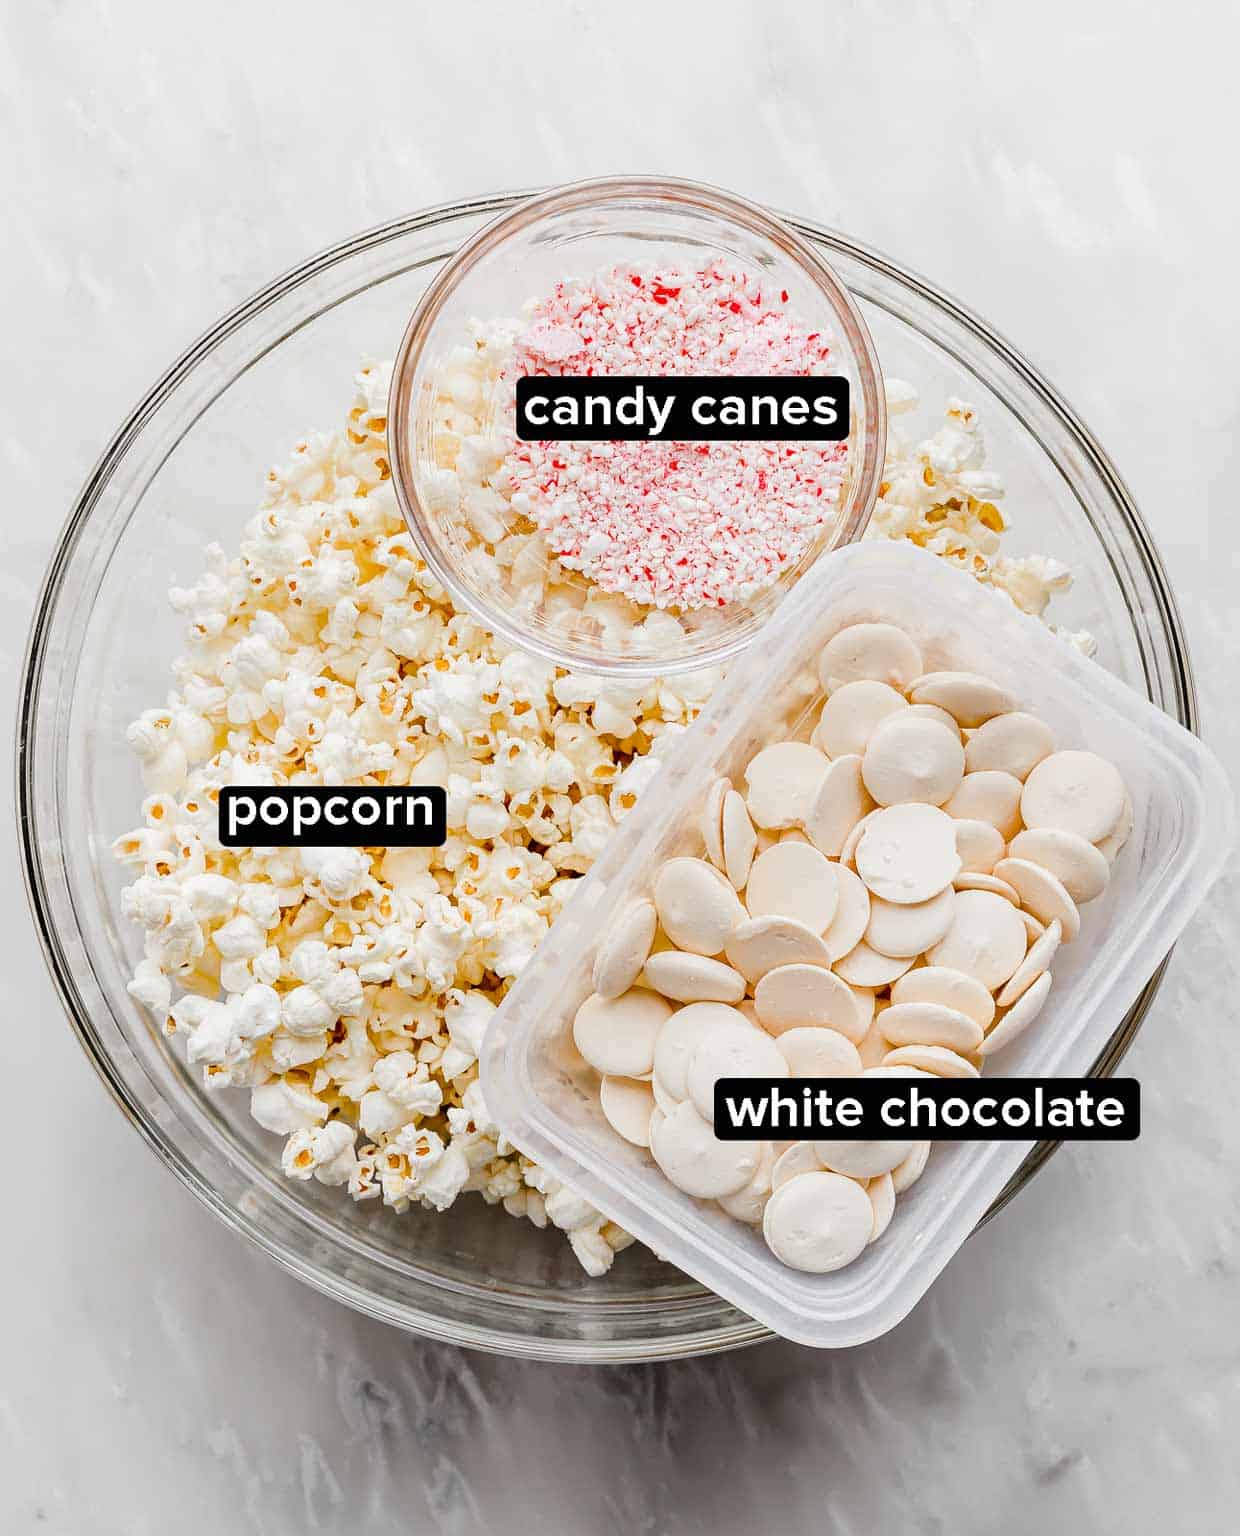 Candy Cane Popcorn ingredients on a white background: popcorn, crushed candy canes, and white chocolate.